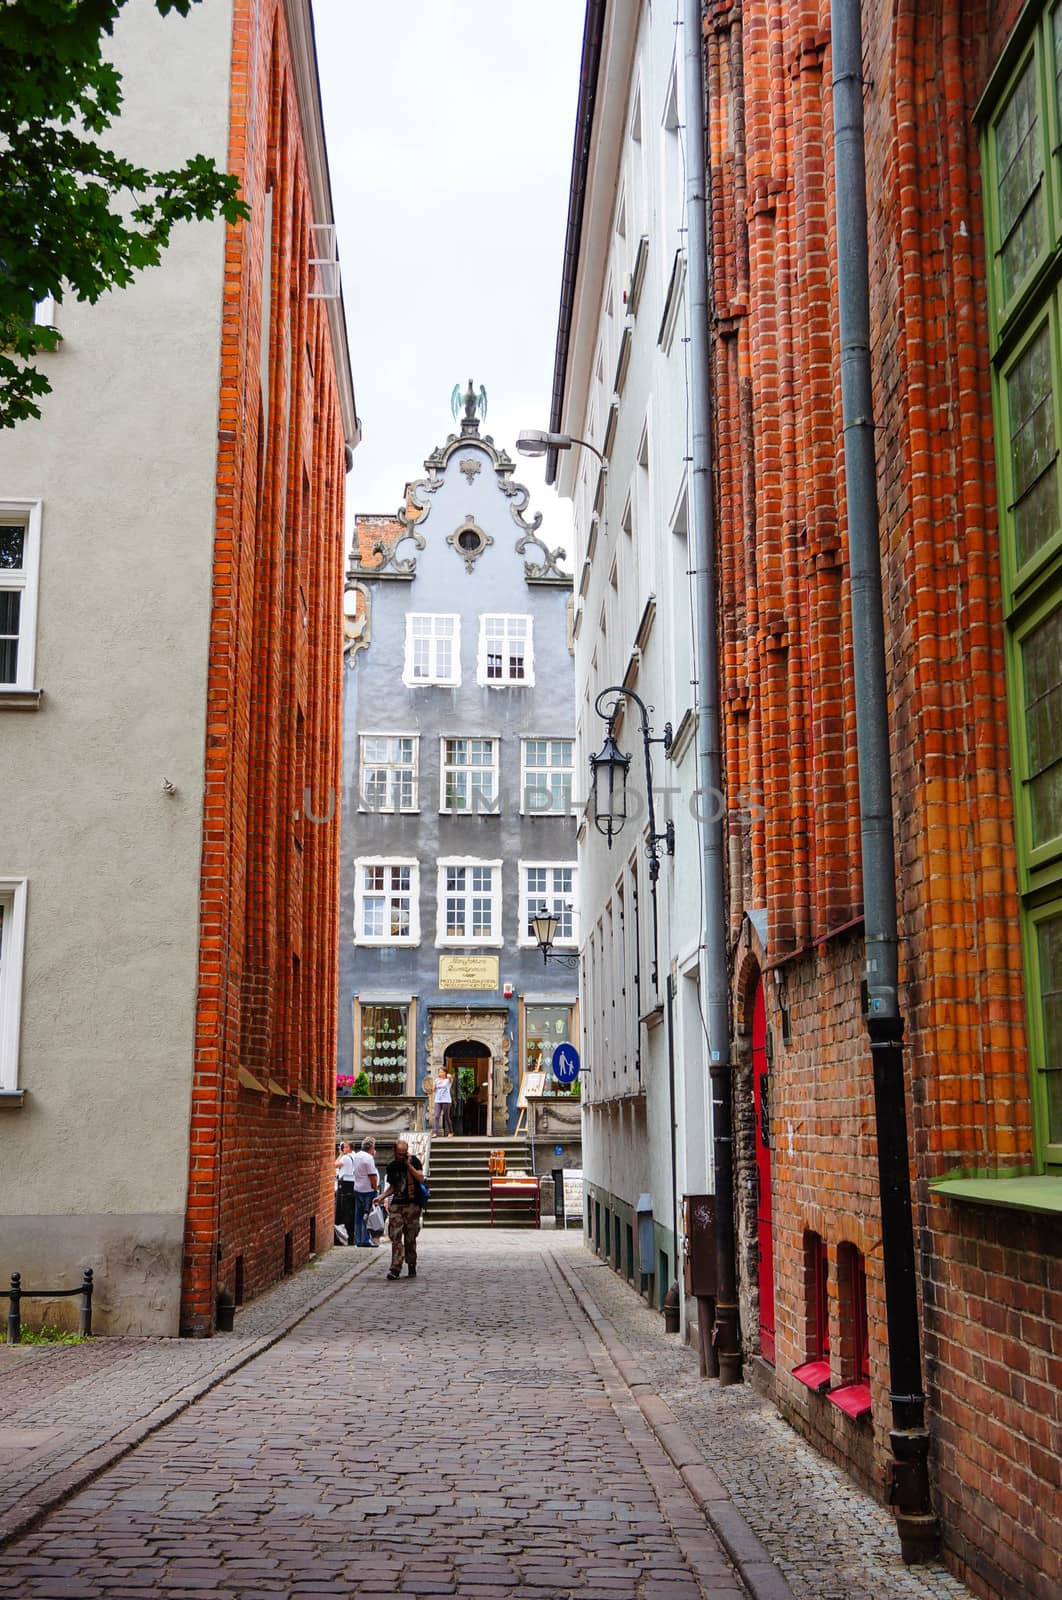 GDANSK, POLAND - JULY 29, 2015: Small inner street at the city center